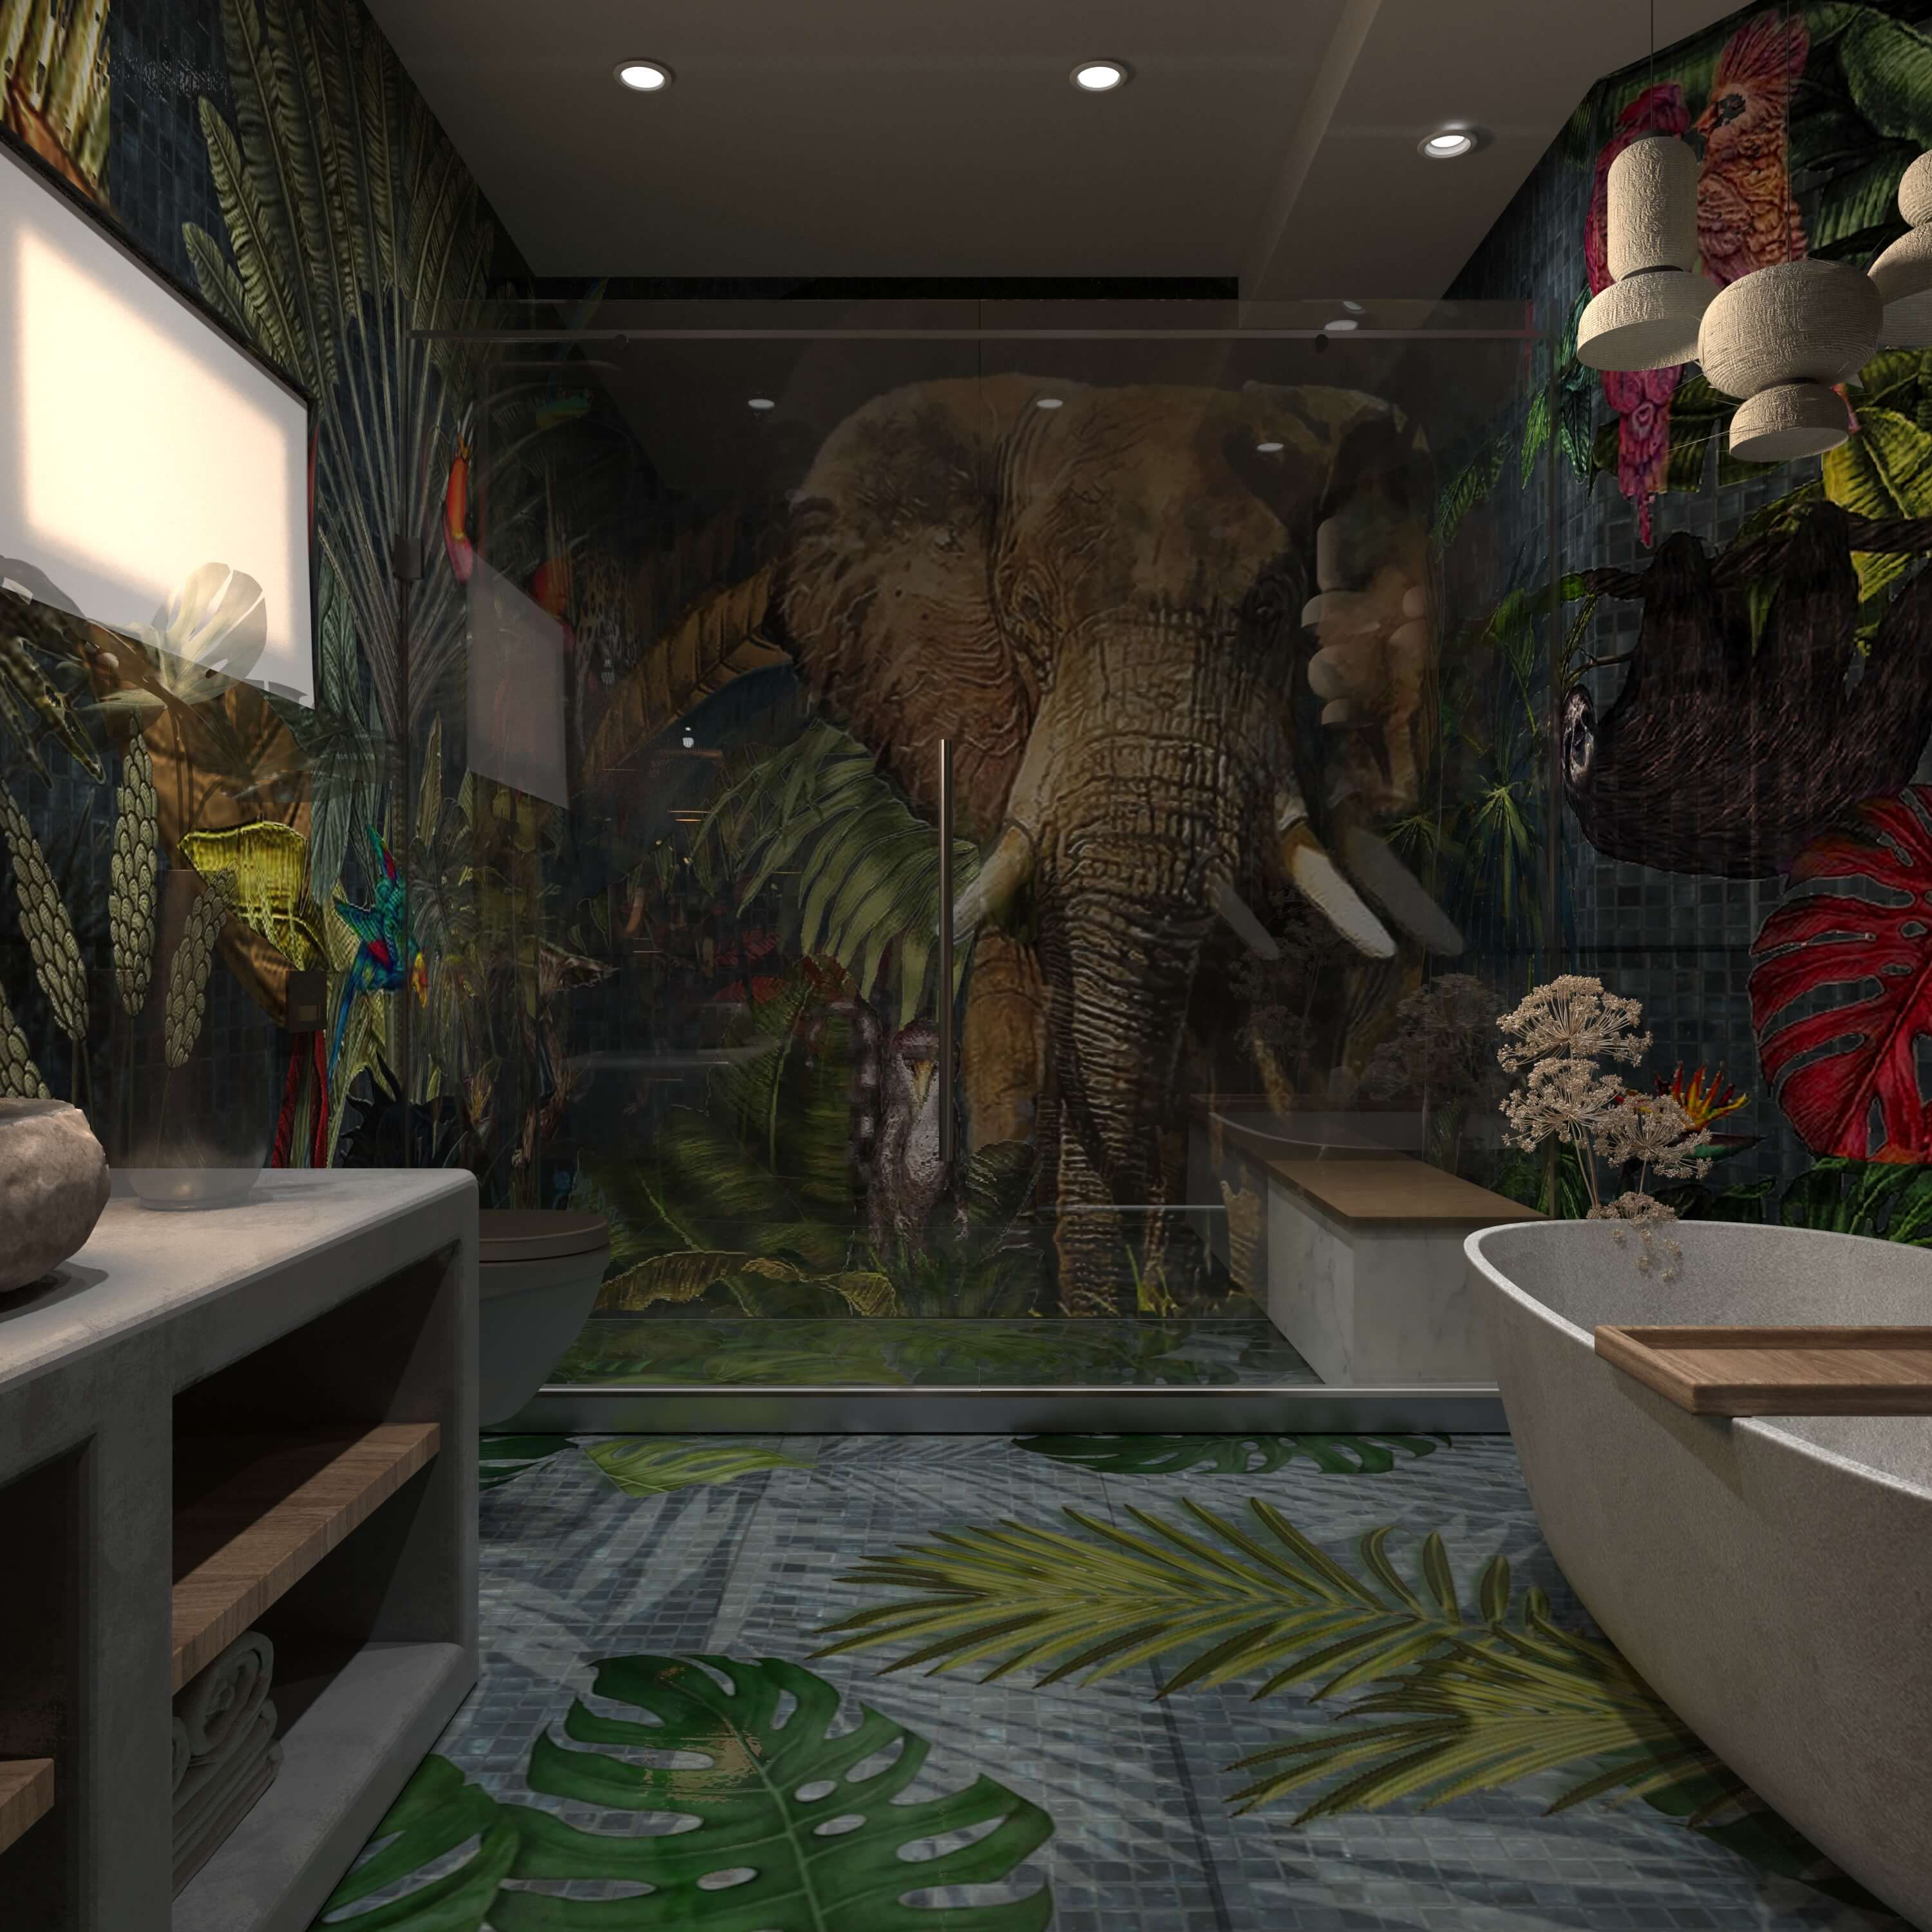 A vibrant jungle-themed mosaic artwork depicting an elephant, tropical plants, and birds adorning the walls of a modern bathroom.